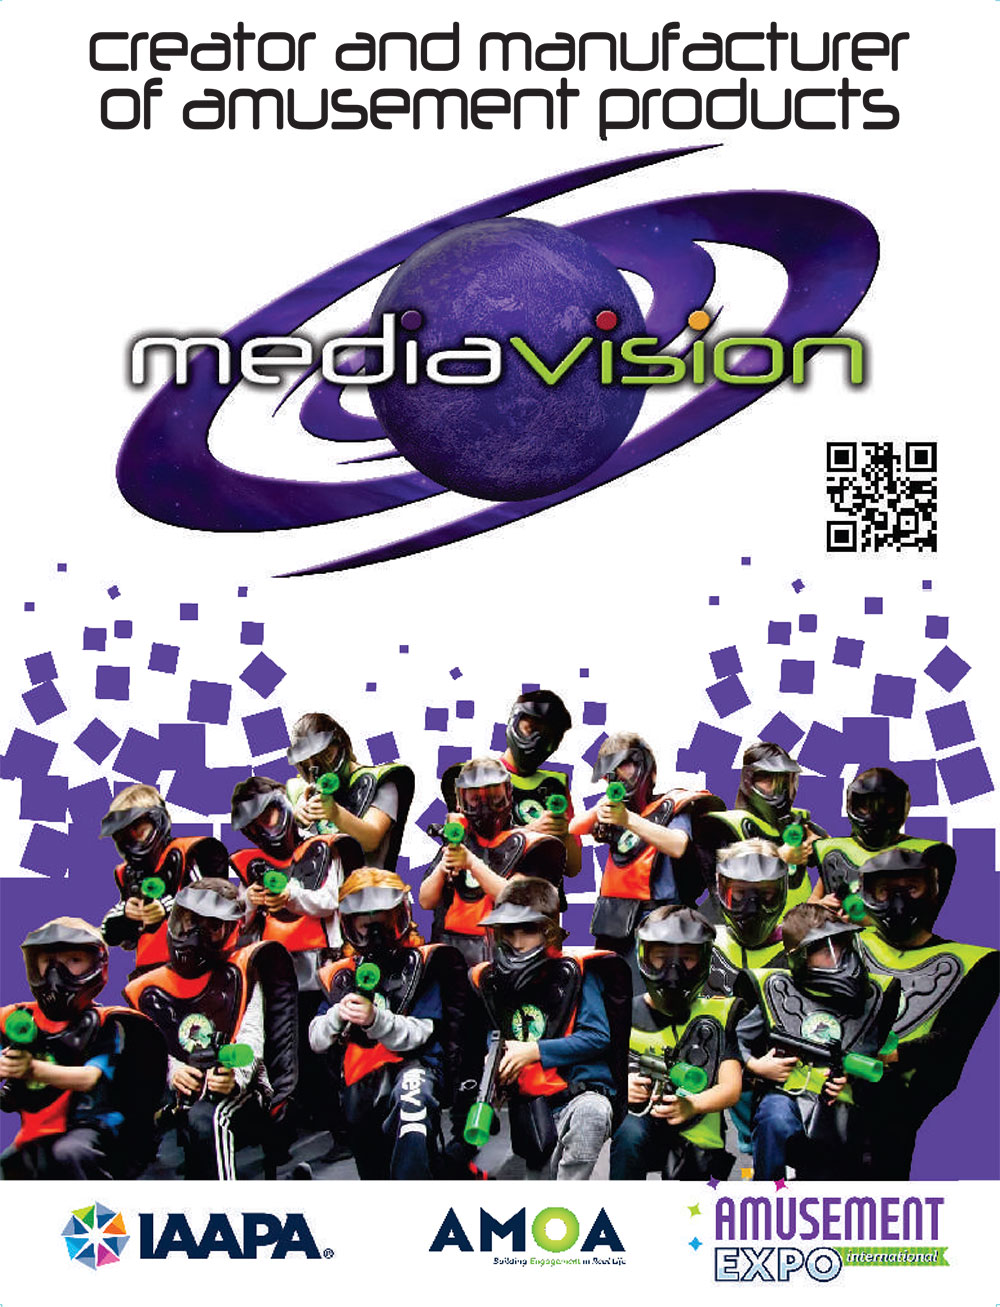 Media Vision Inc. - Creator and Manufacturer of Amusement Products